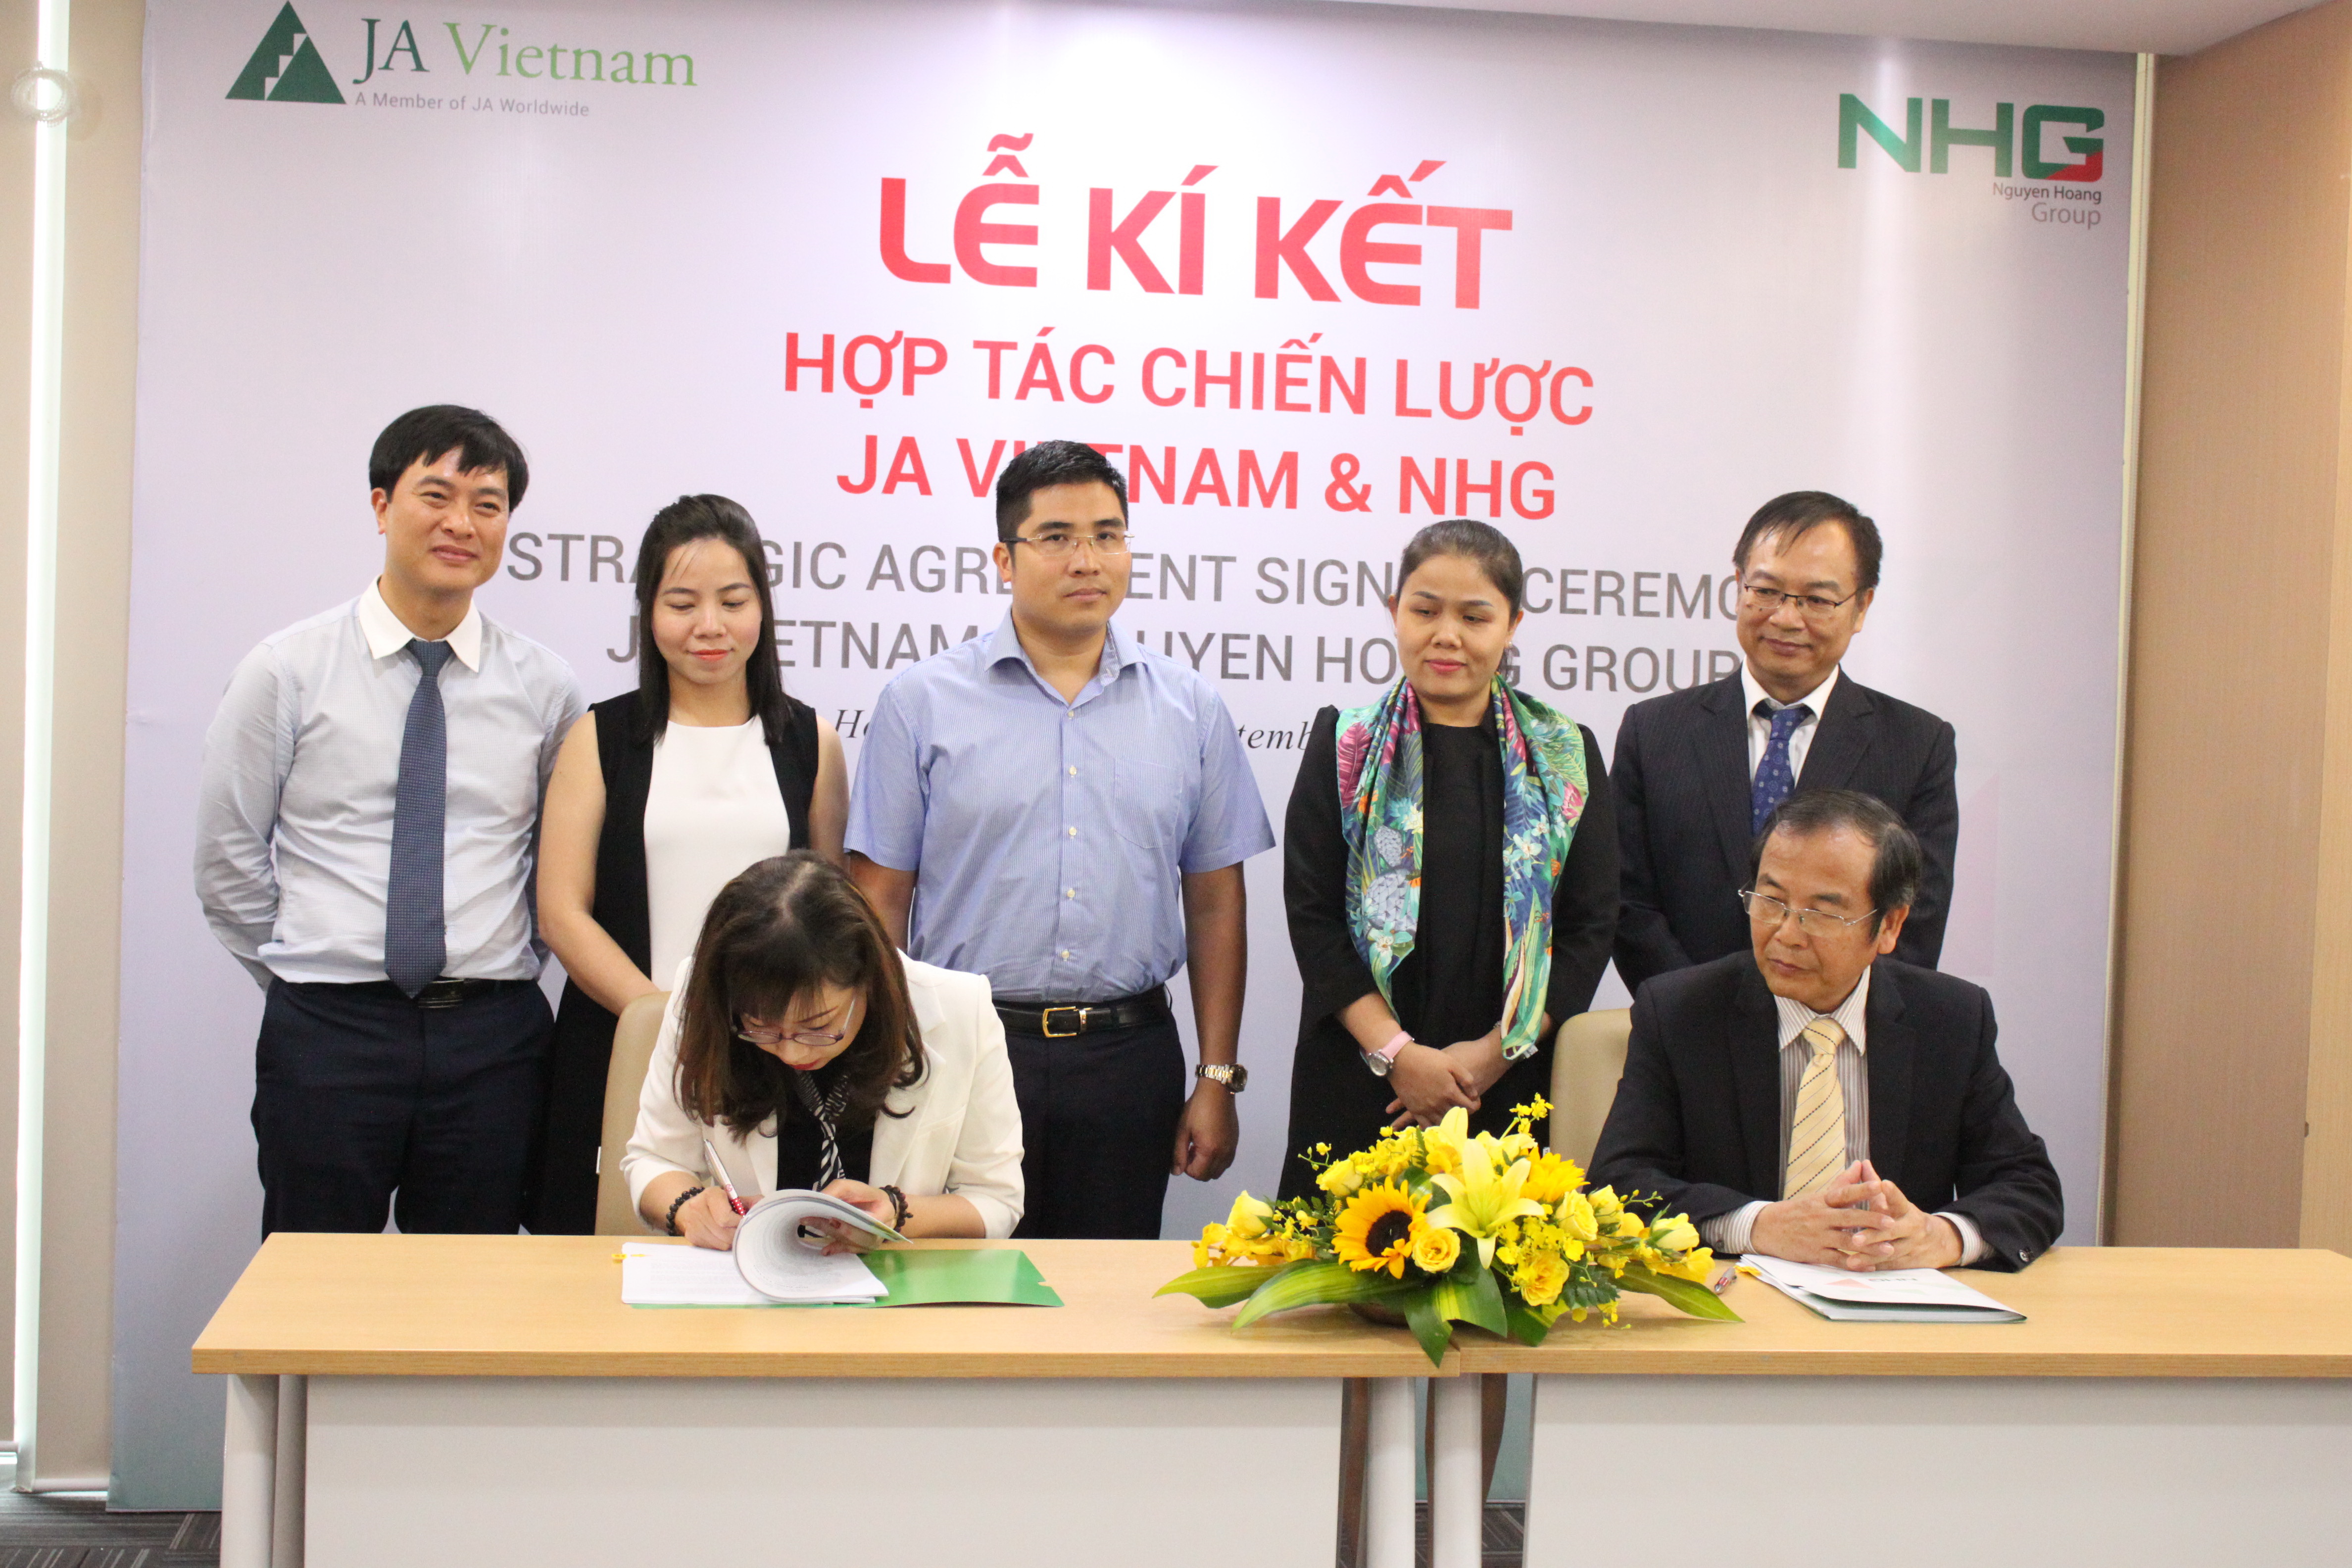 ​Vietnamese firm joins hands with Junior Achievement to launch start-up training programs